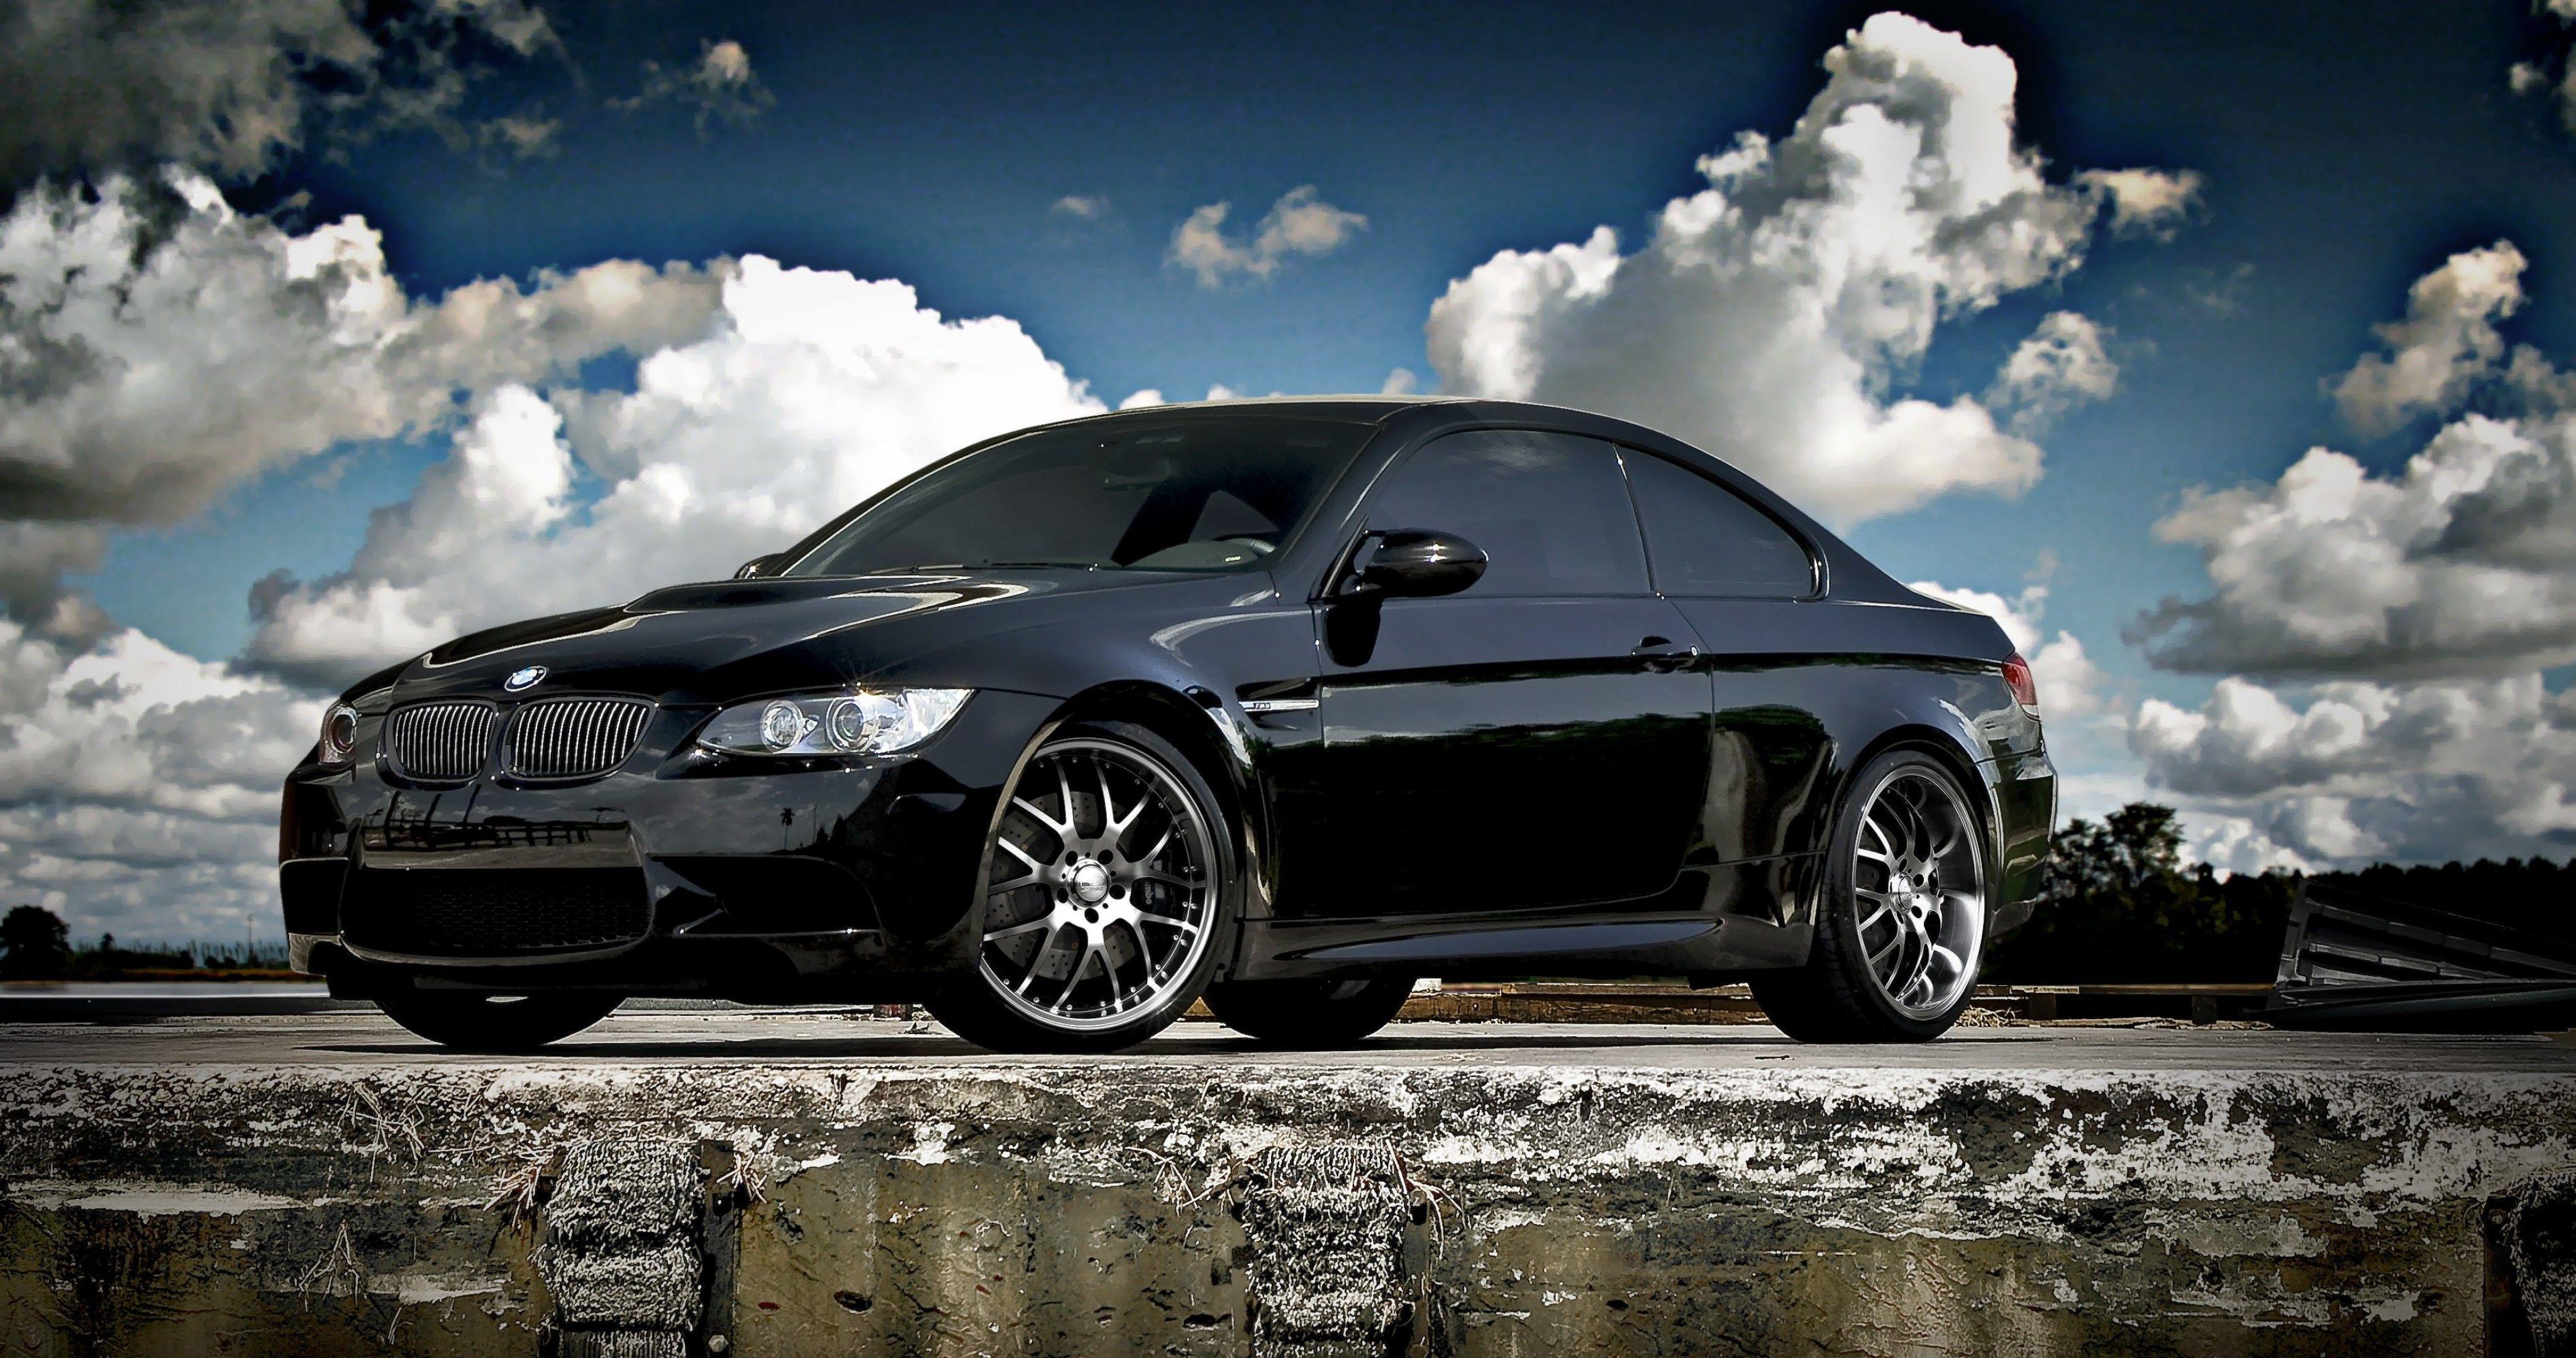 E92 BMW M3 wallpaper by AutoModePhotography  Download on ZEDGE  5873